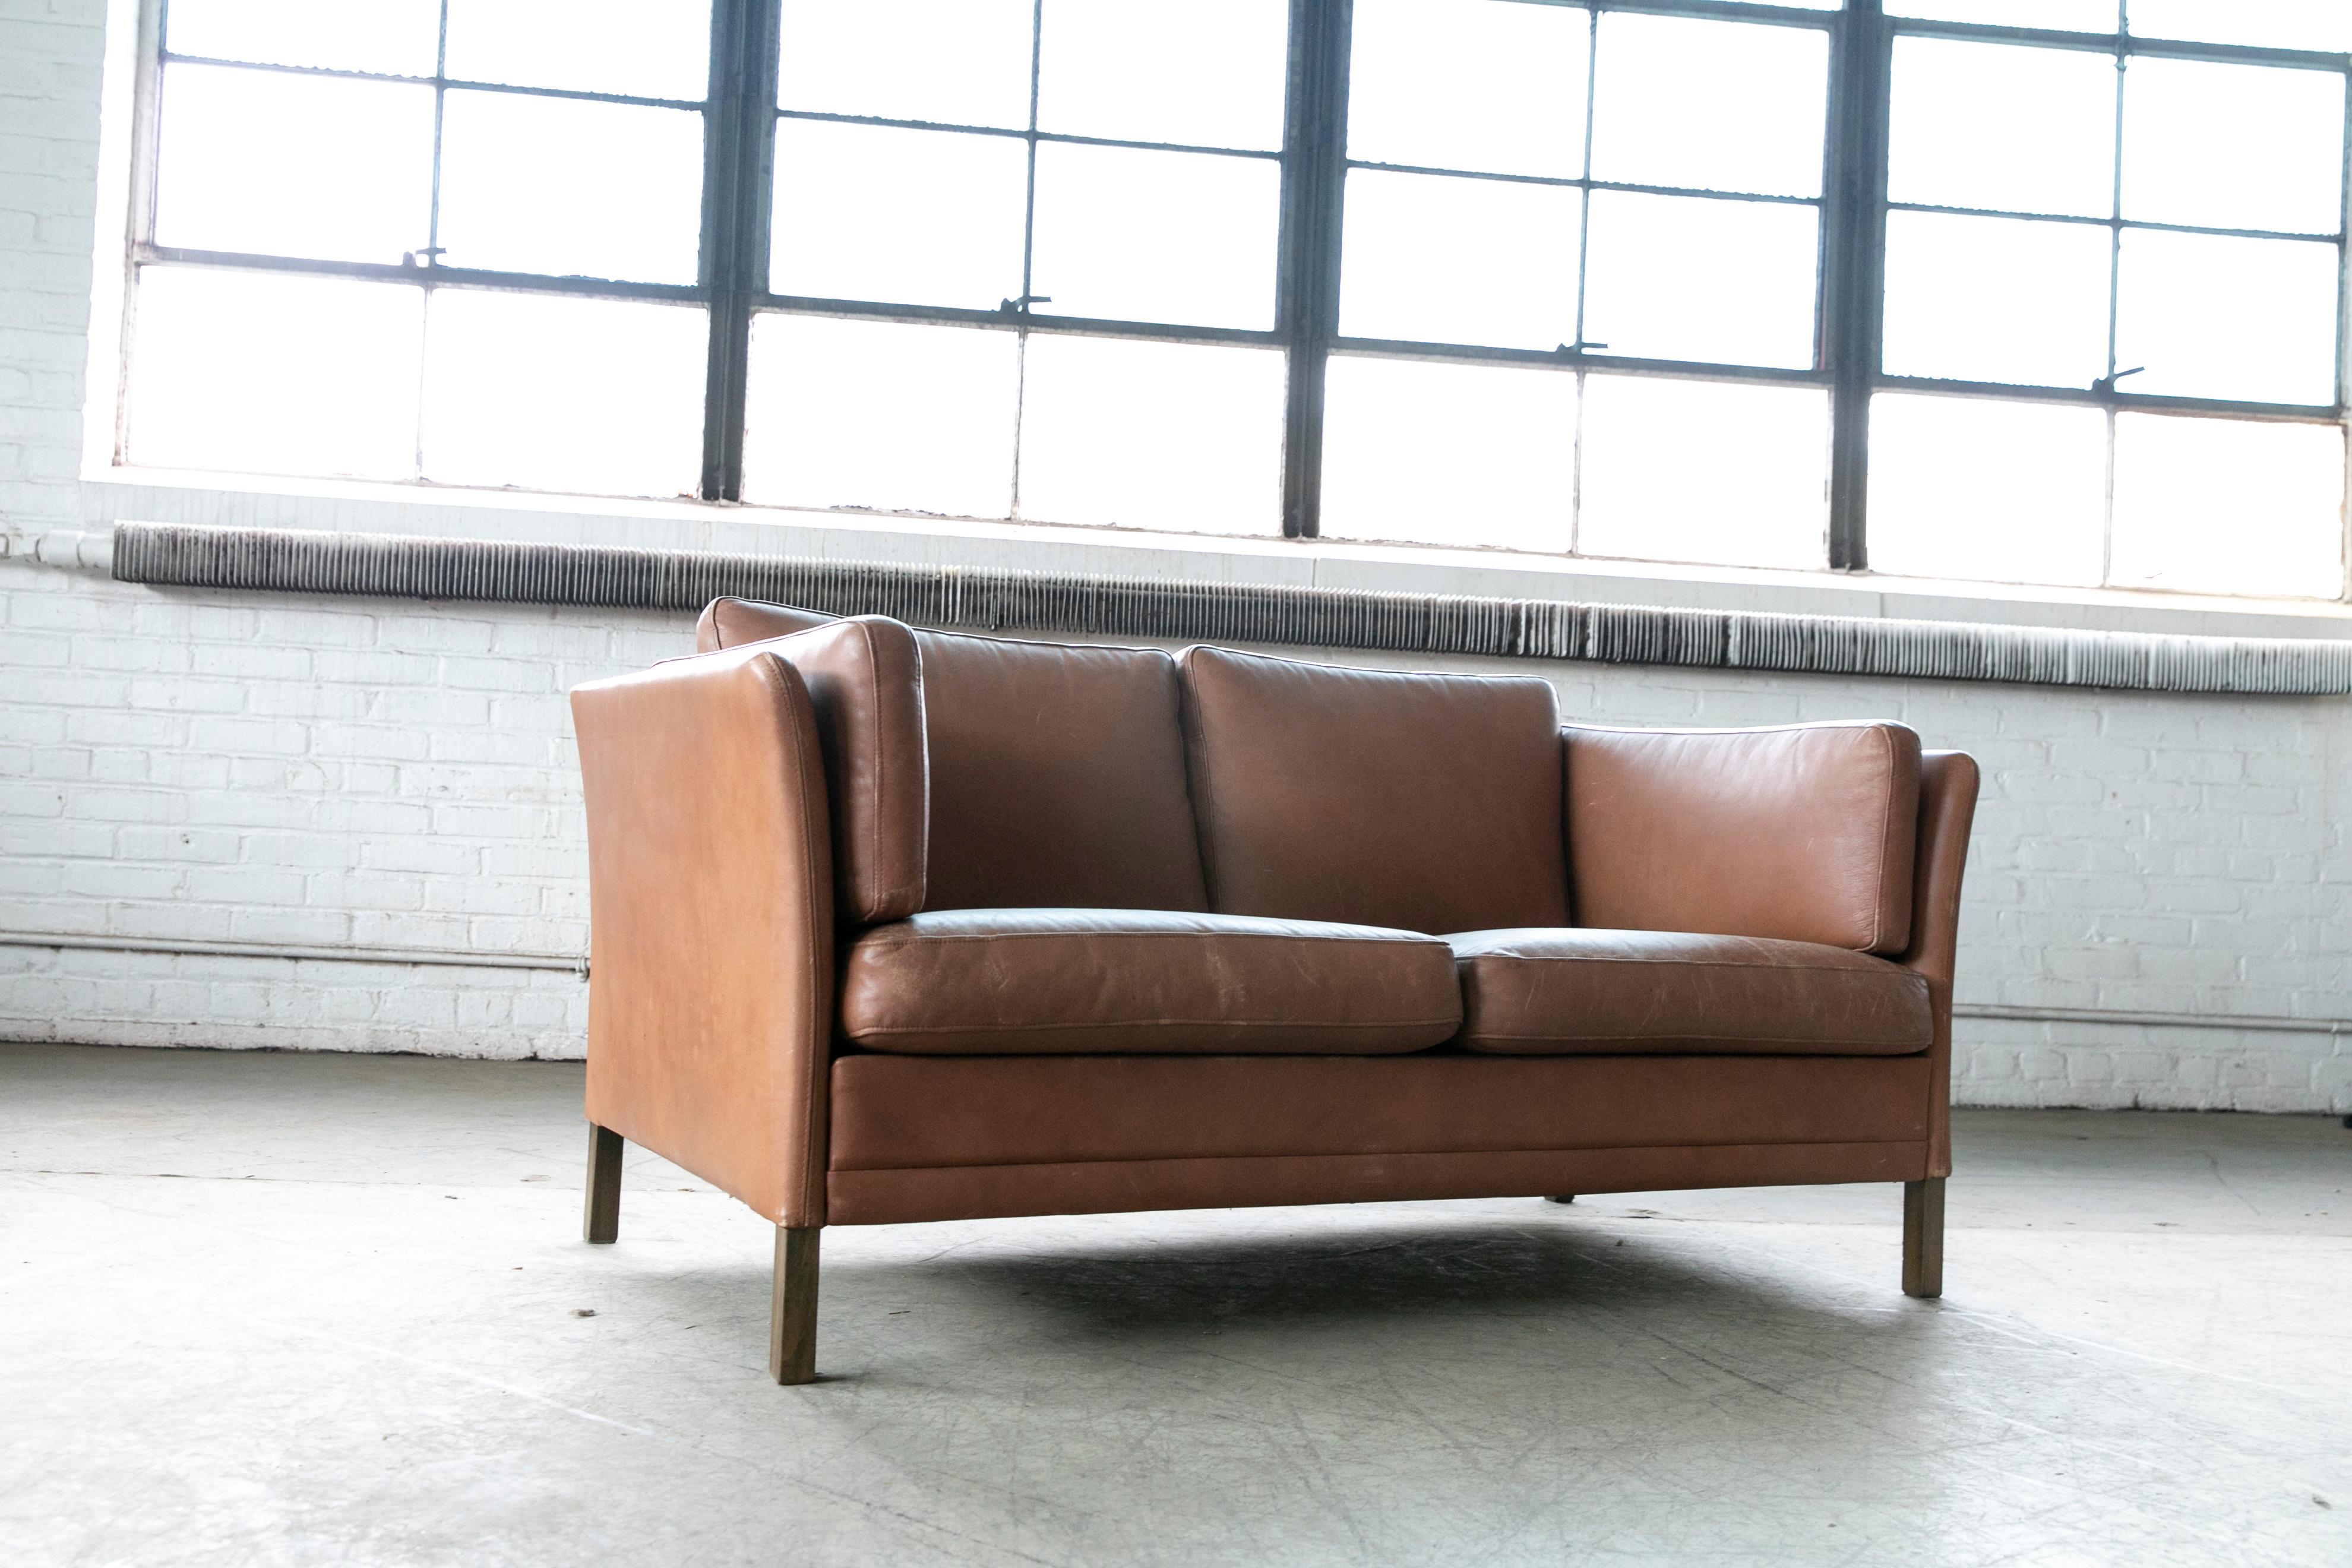 Beautiful Two-Seat Cognac Colored Leather Sofa Model MH2225 by Mogens Hansen 2